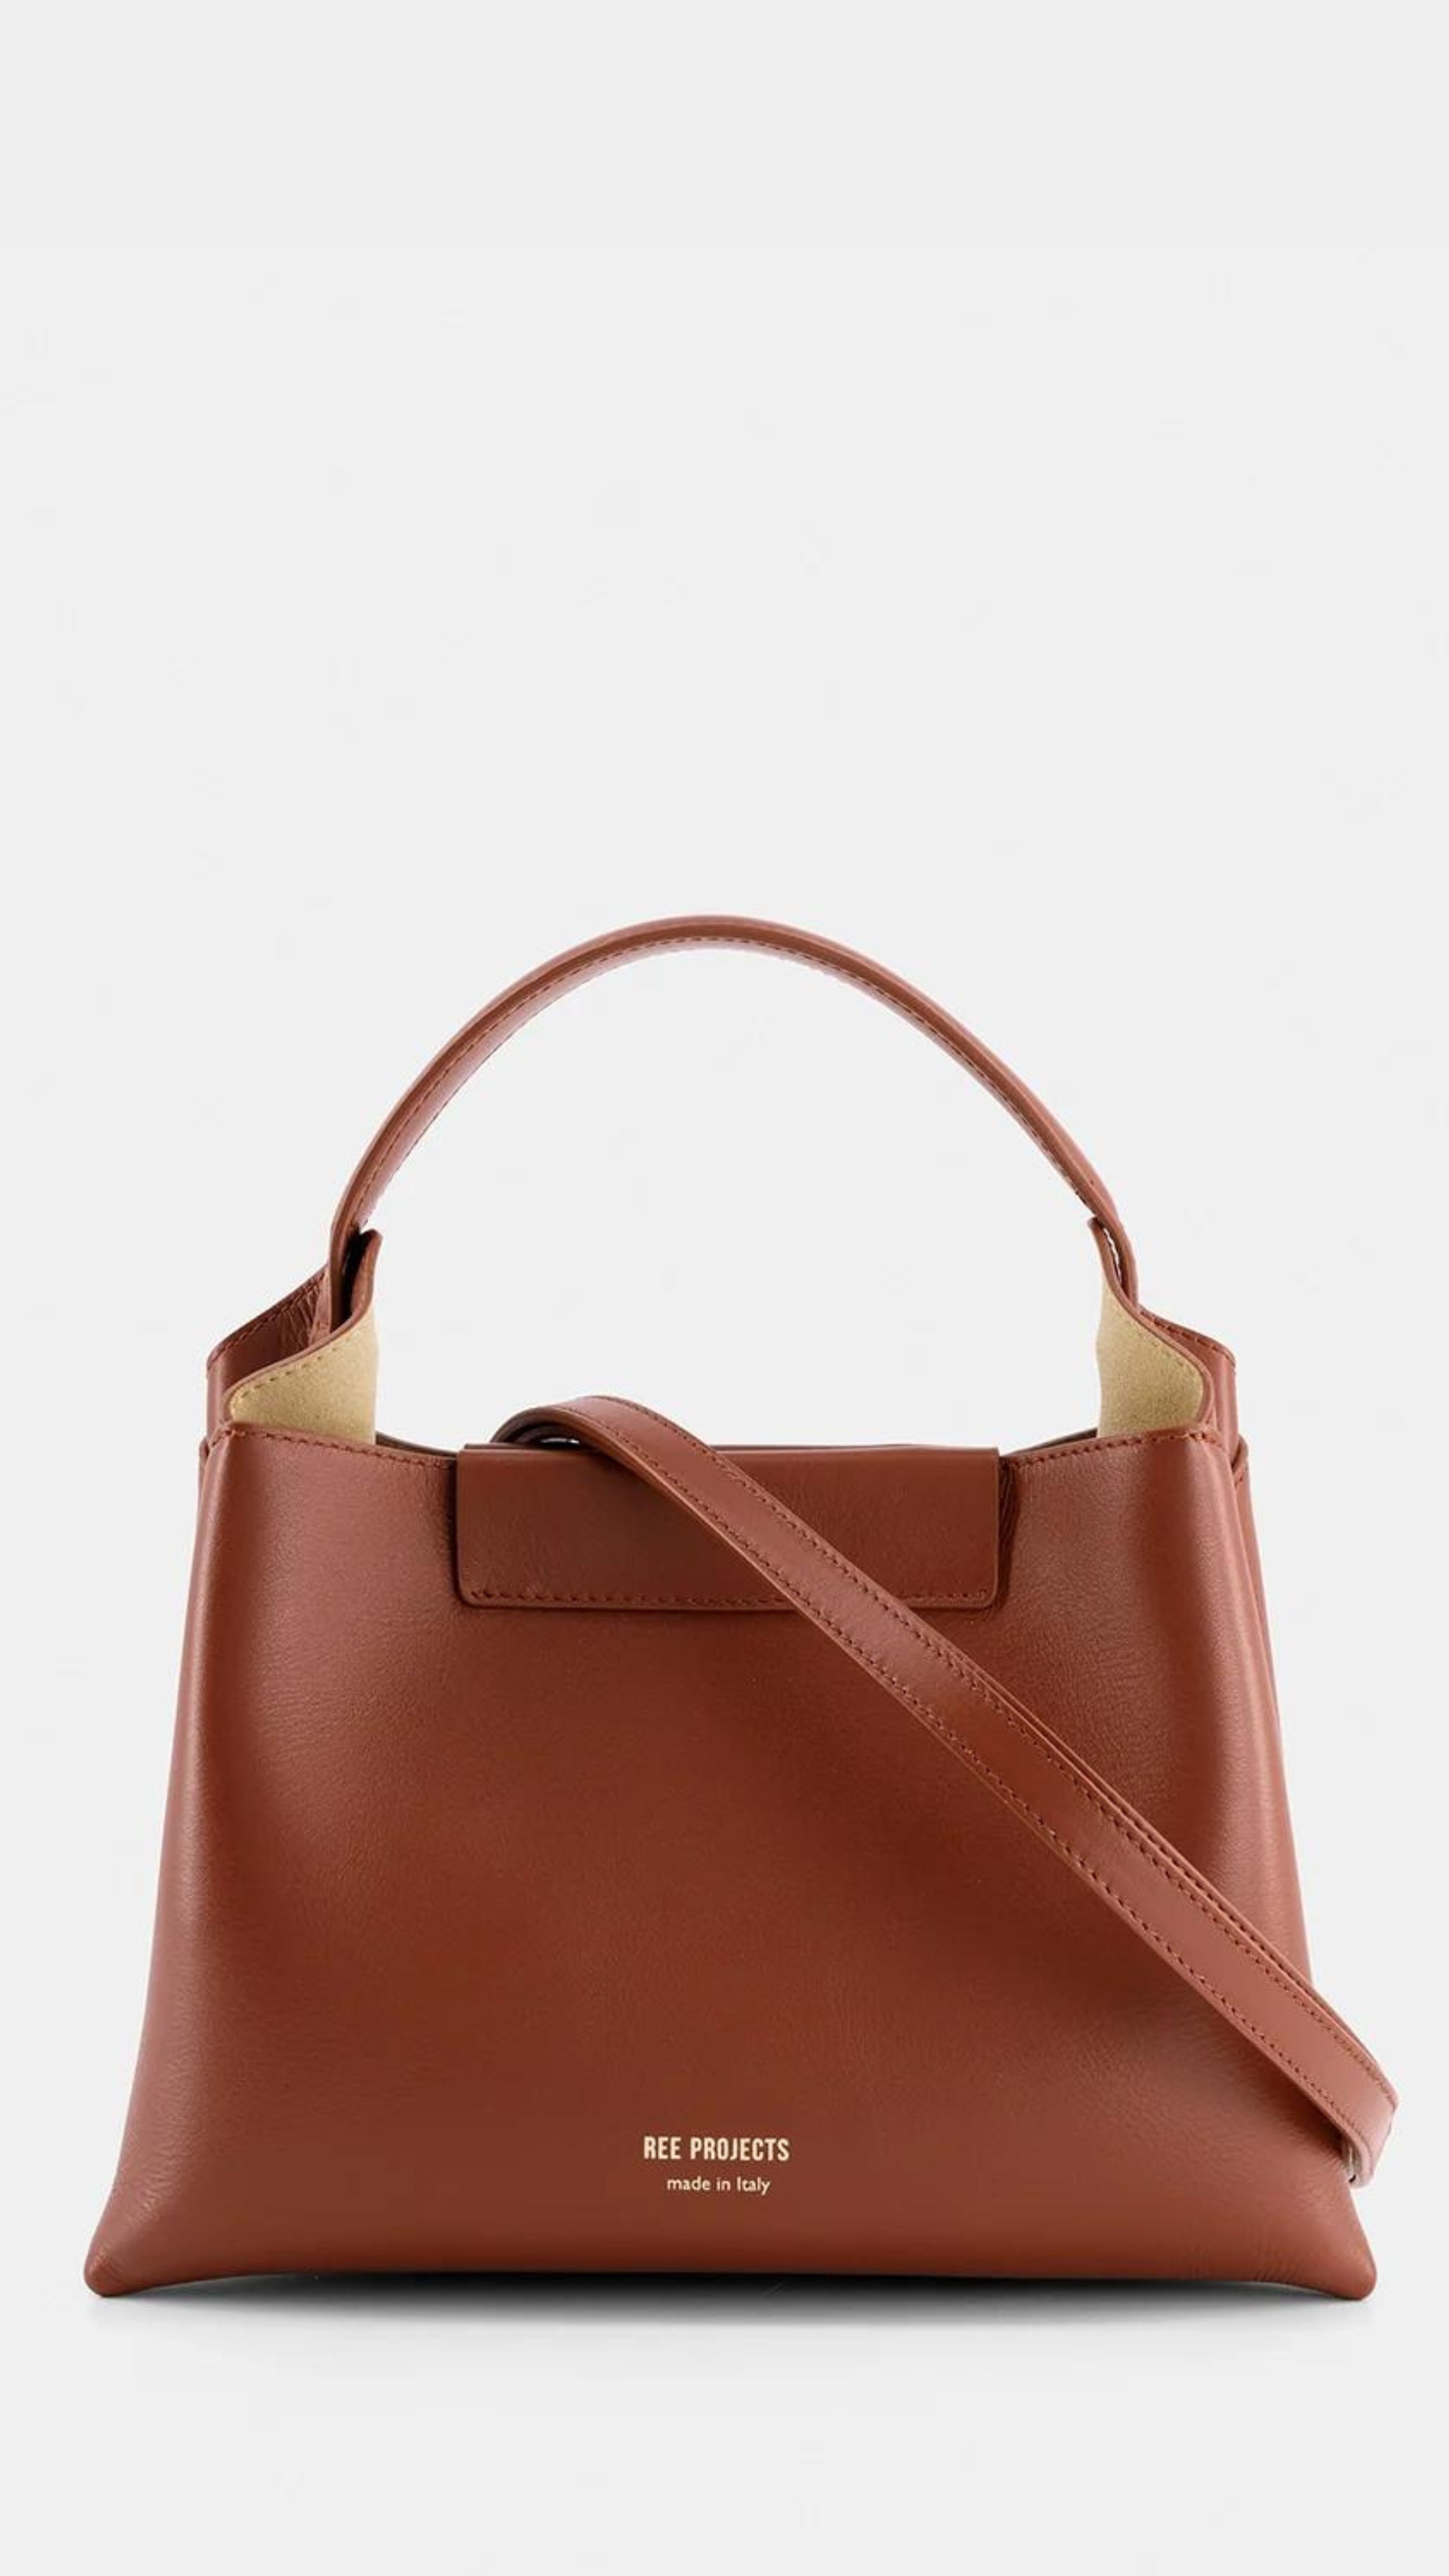 Ree Projects Elize Medium Bag in Cognac Brown. Made in italy and sustainable. Squared shape, it features a magnetic button closure and signature gussets. The purse has a spacious interior, padded top handle, and optional shoulder strap. Shown from the front view.